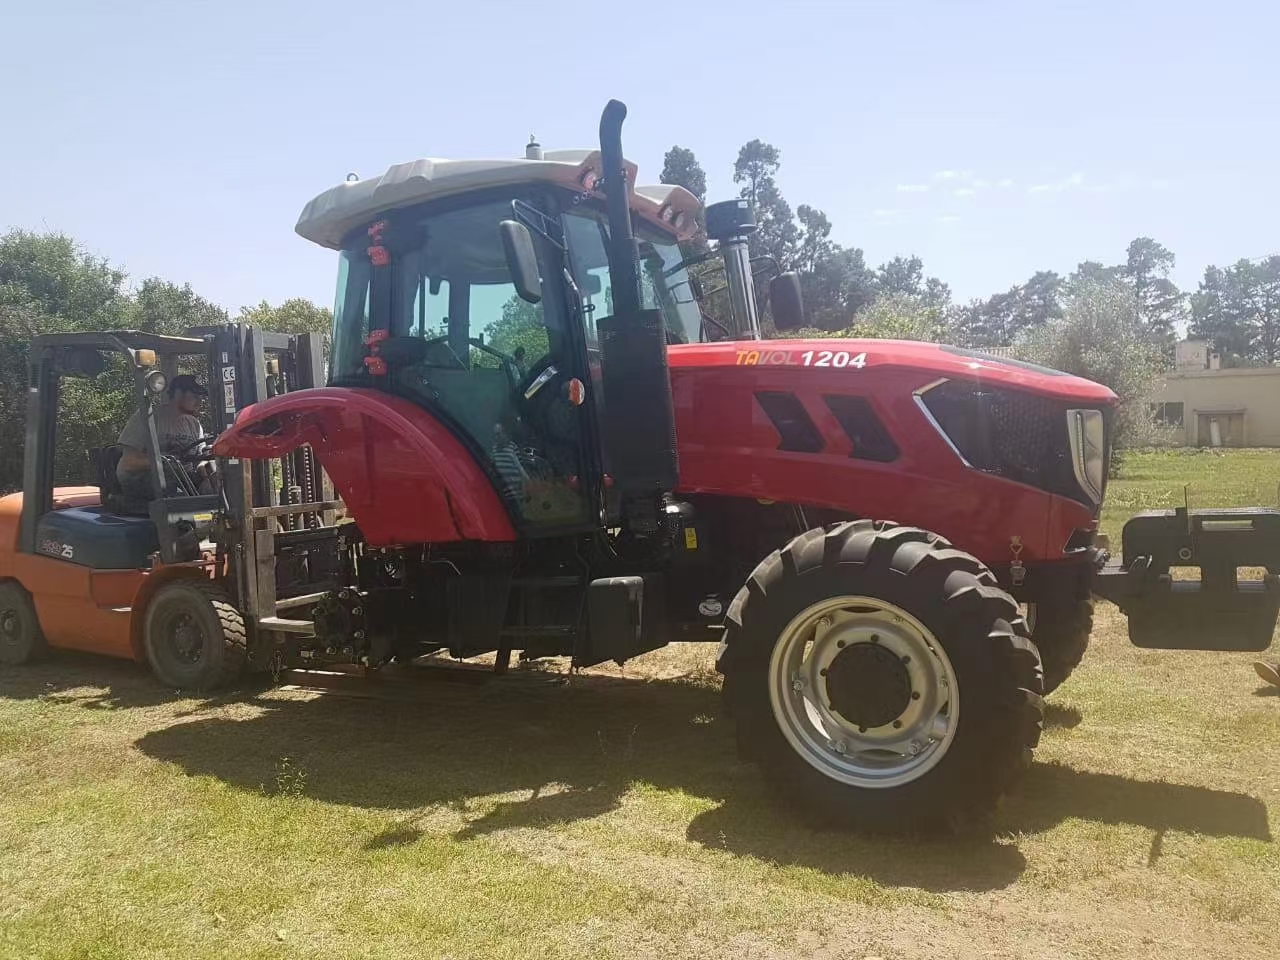 120hp Farm Tractor for Sale and Service in Argentina